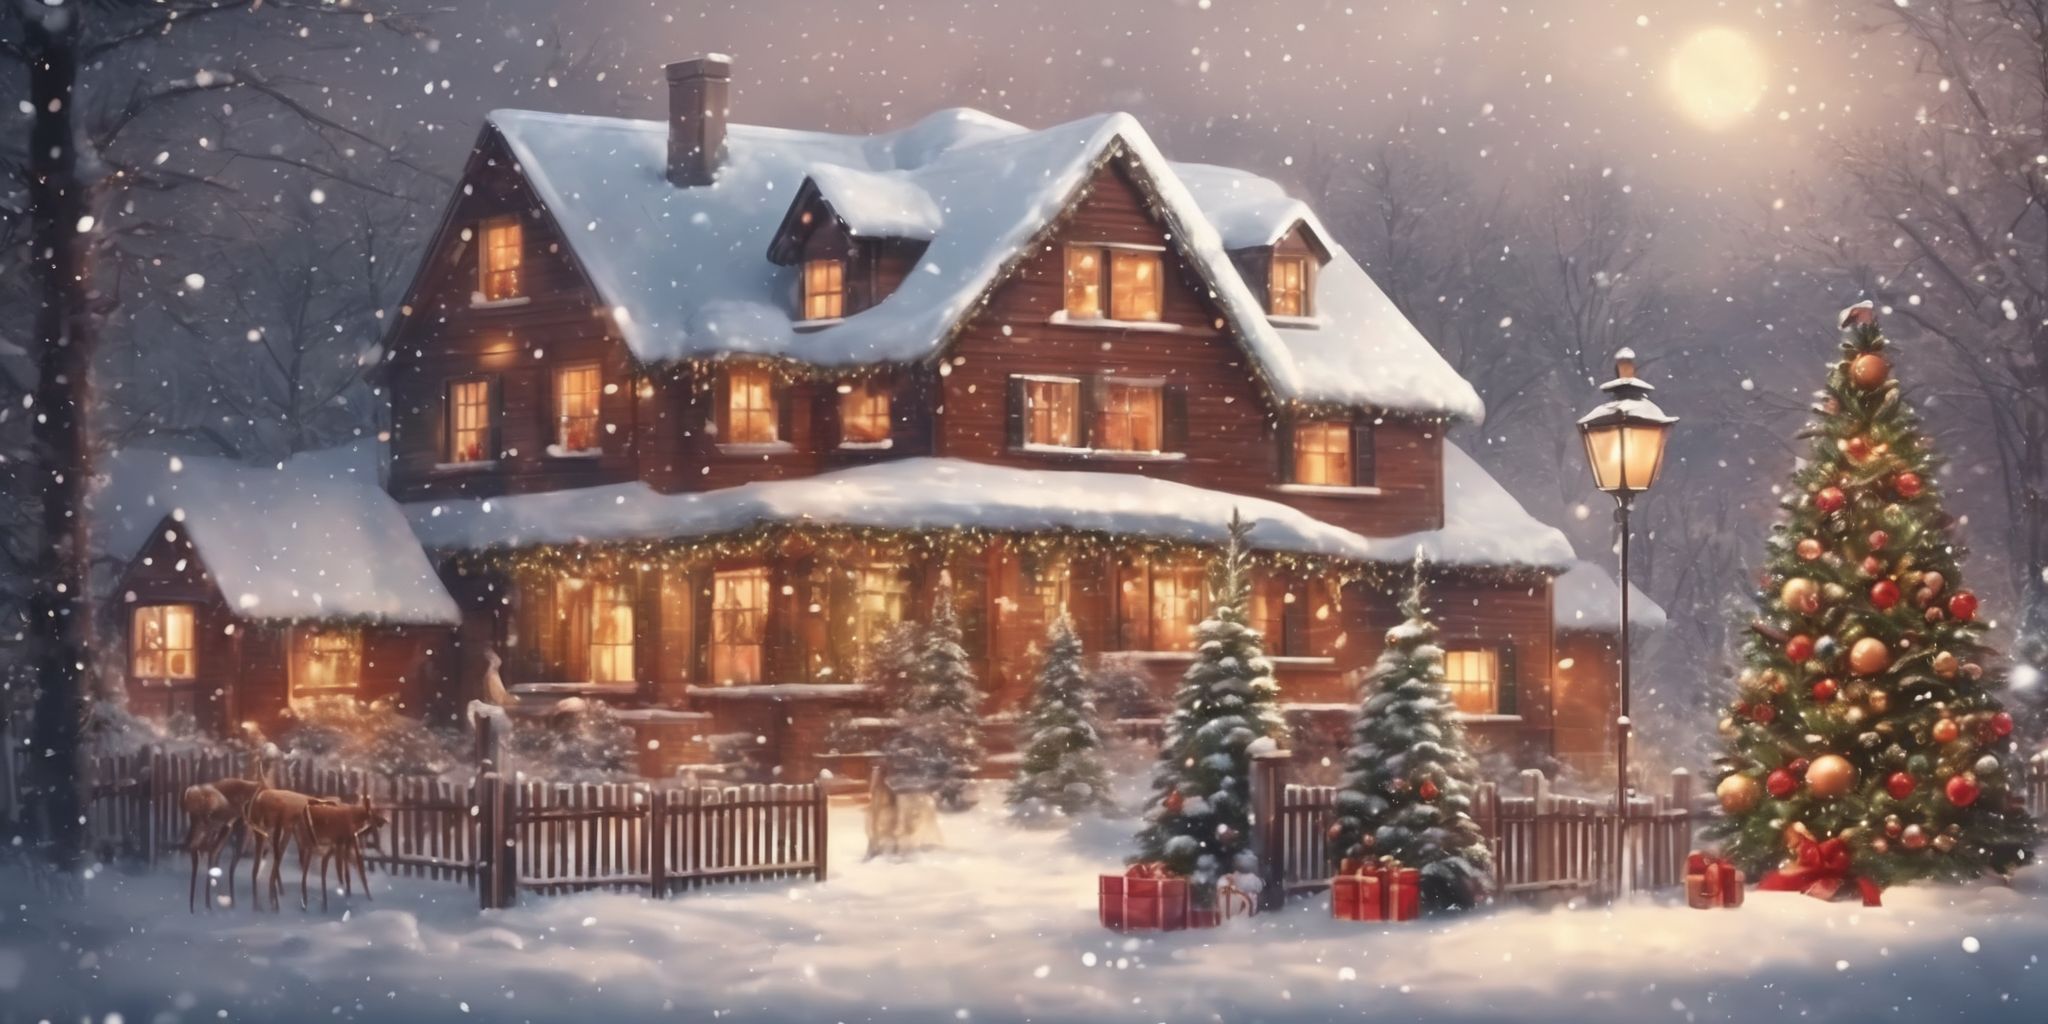 Classics in realistic Christmas style